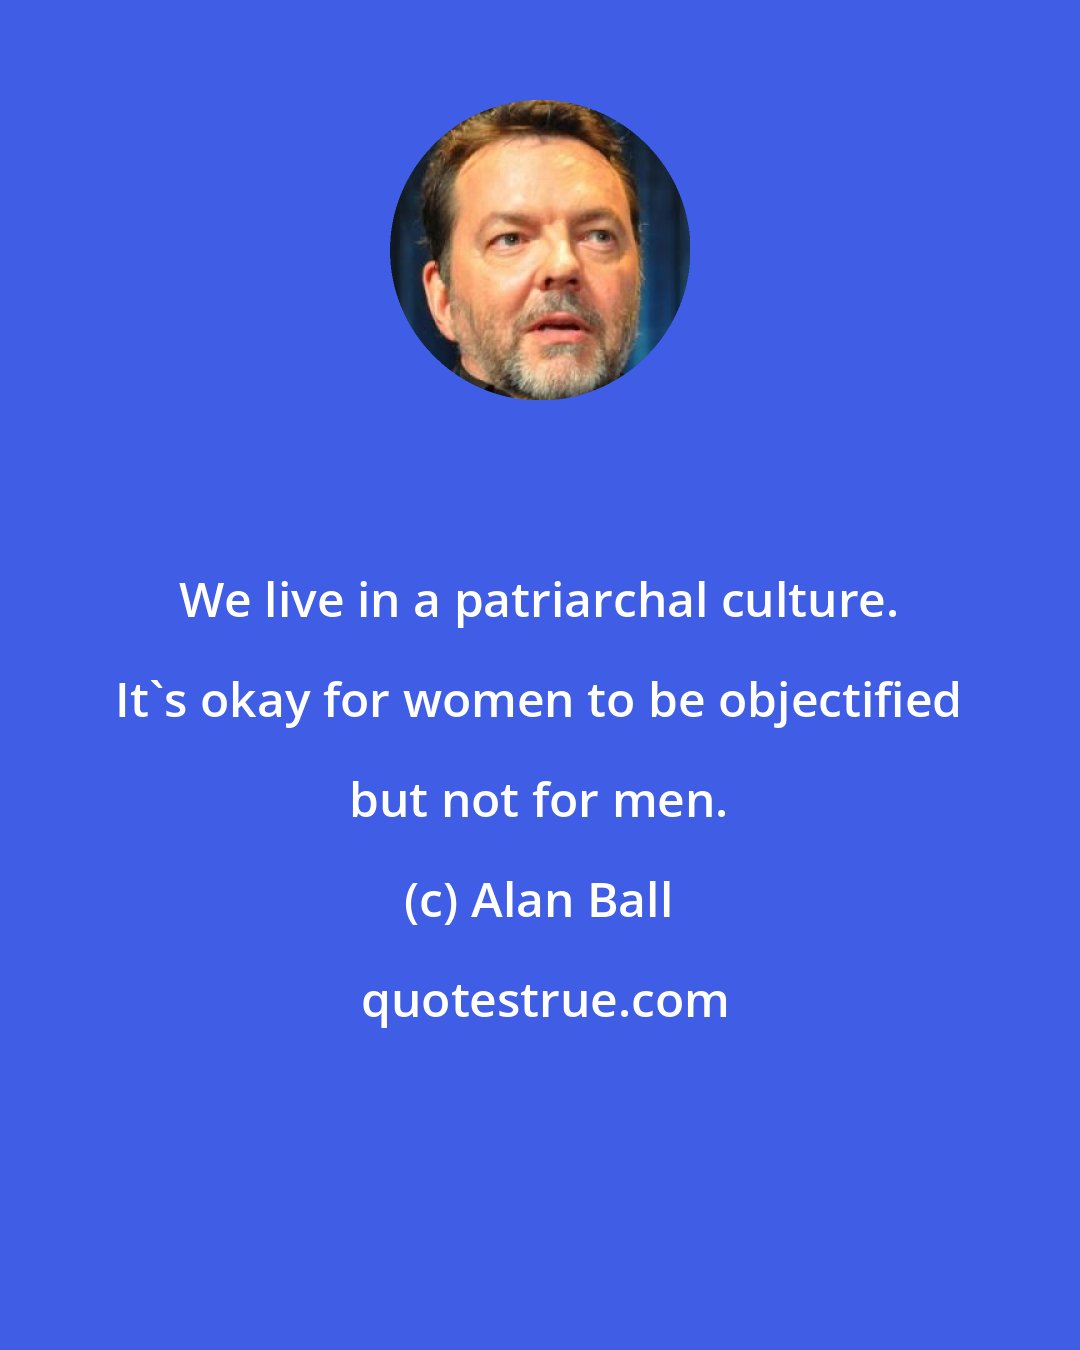 Alan Ball: We live in a patriarchal culture. It's okay for women to be objectified but not for men.